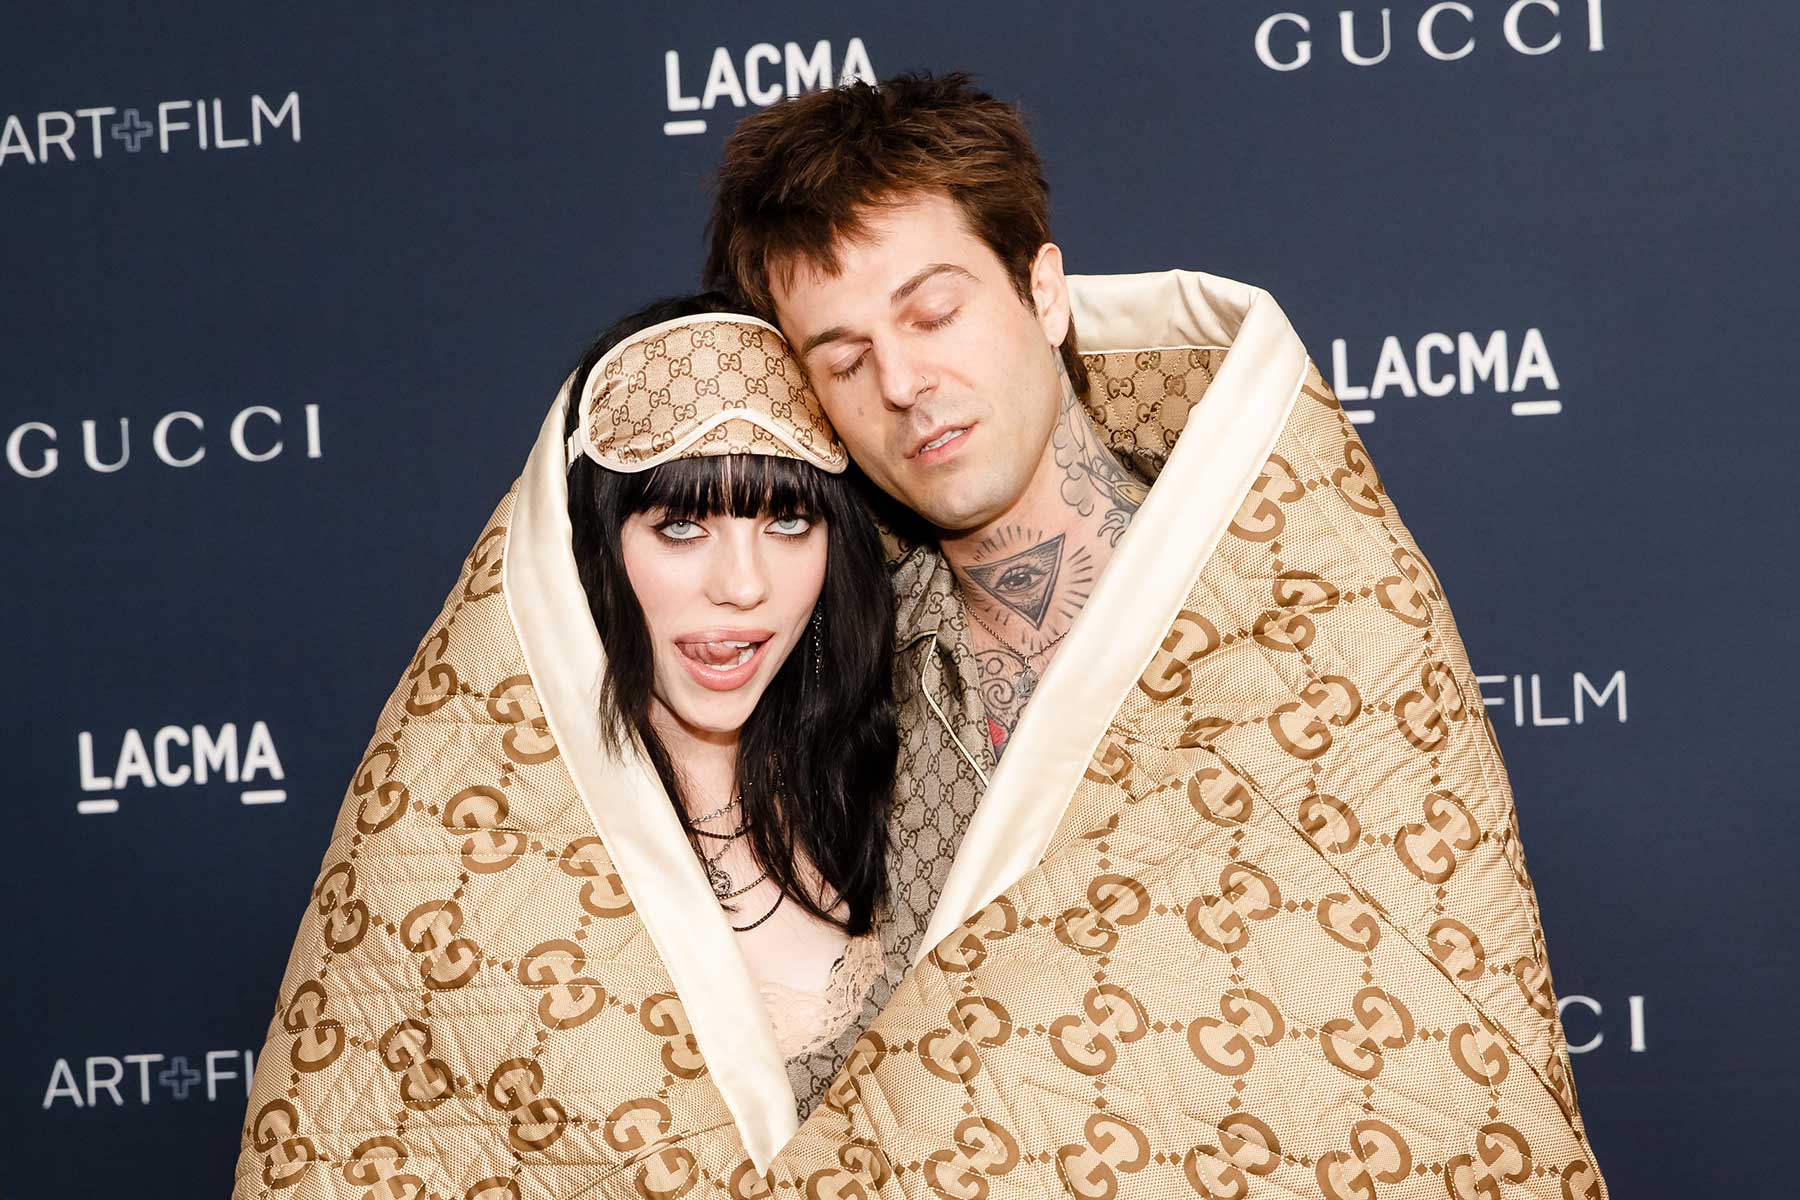 Billie Eilish, Jesse Rutherford in Matching Gucci at LACMA